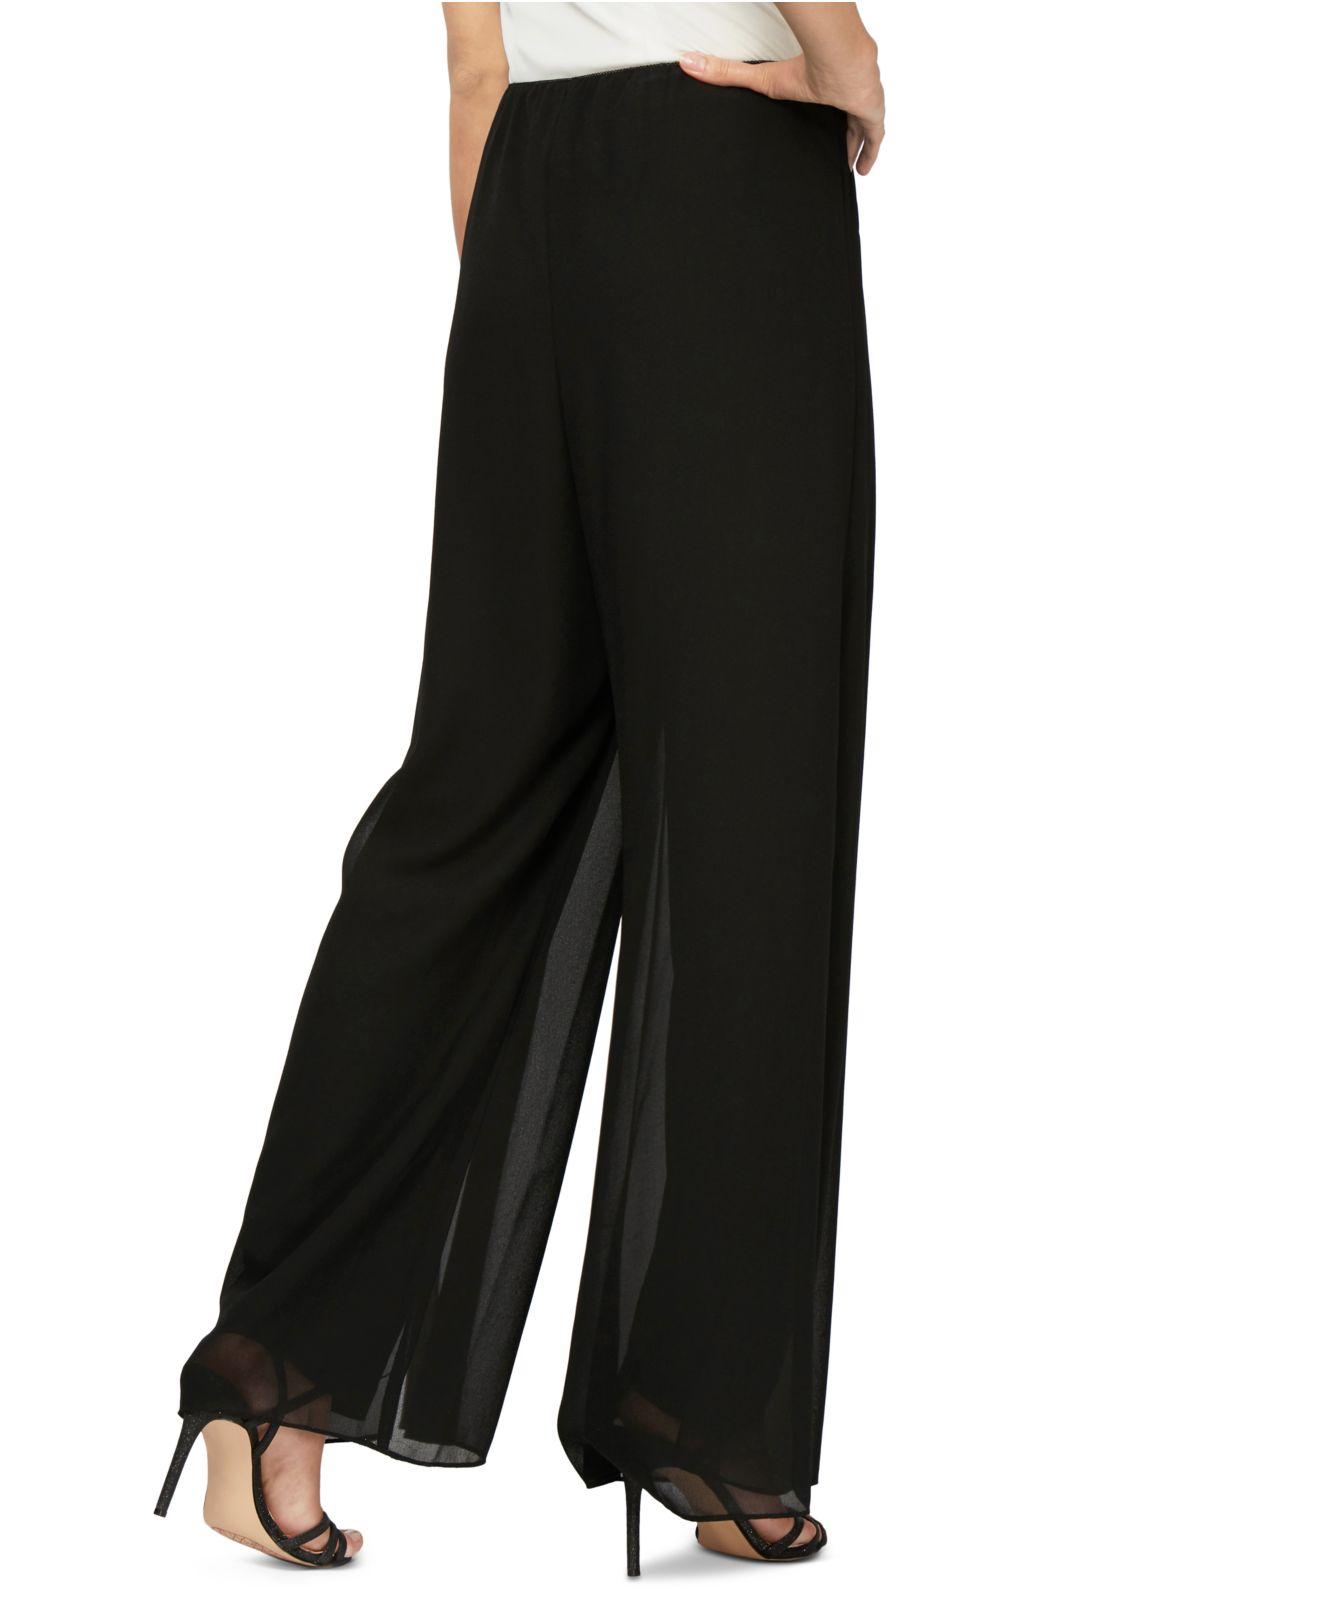 Alex Evenings Synthetic Petite Straight-leg Overlay Pants in Black - Lyst